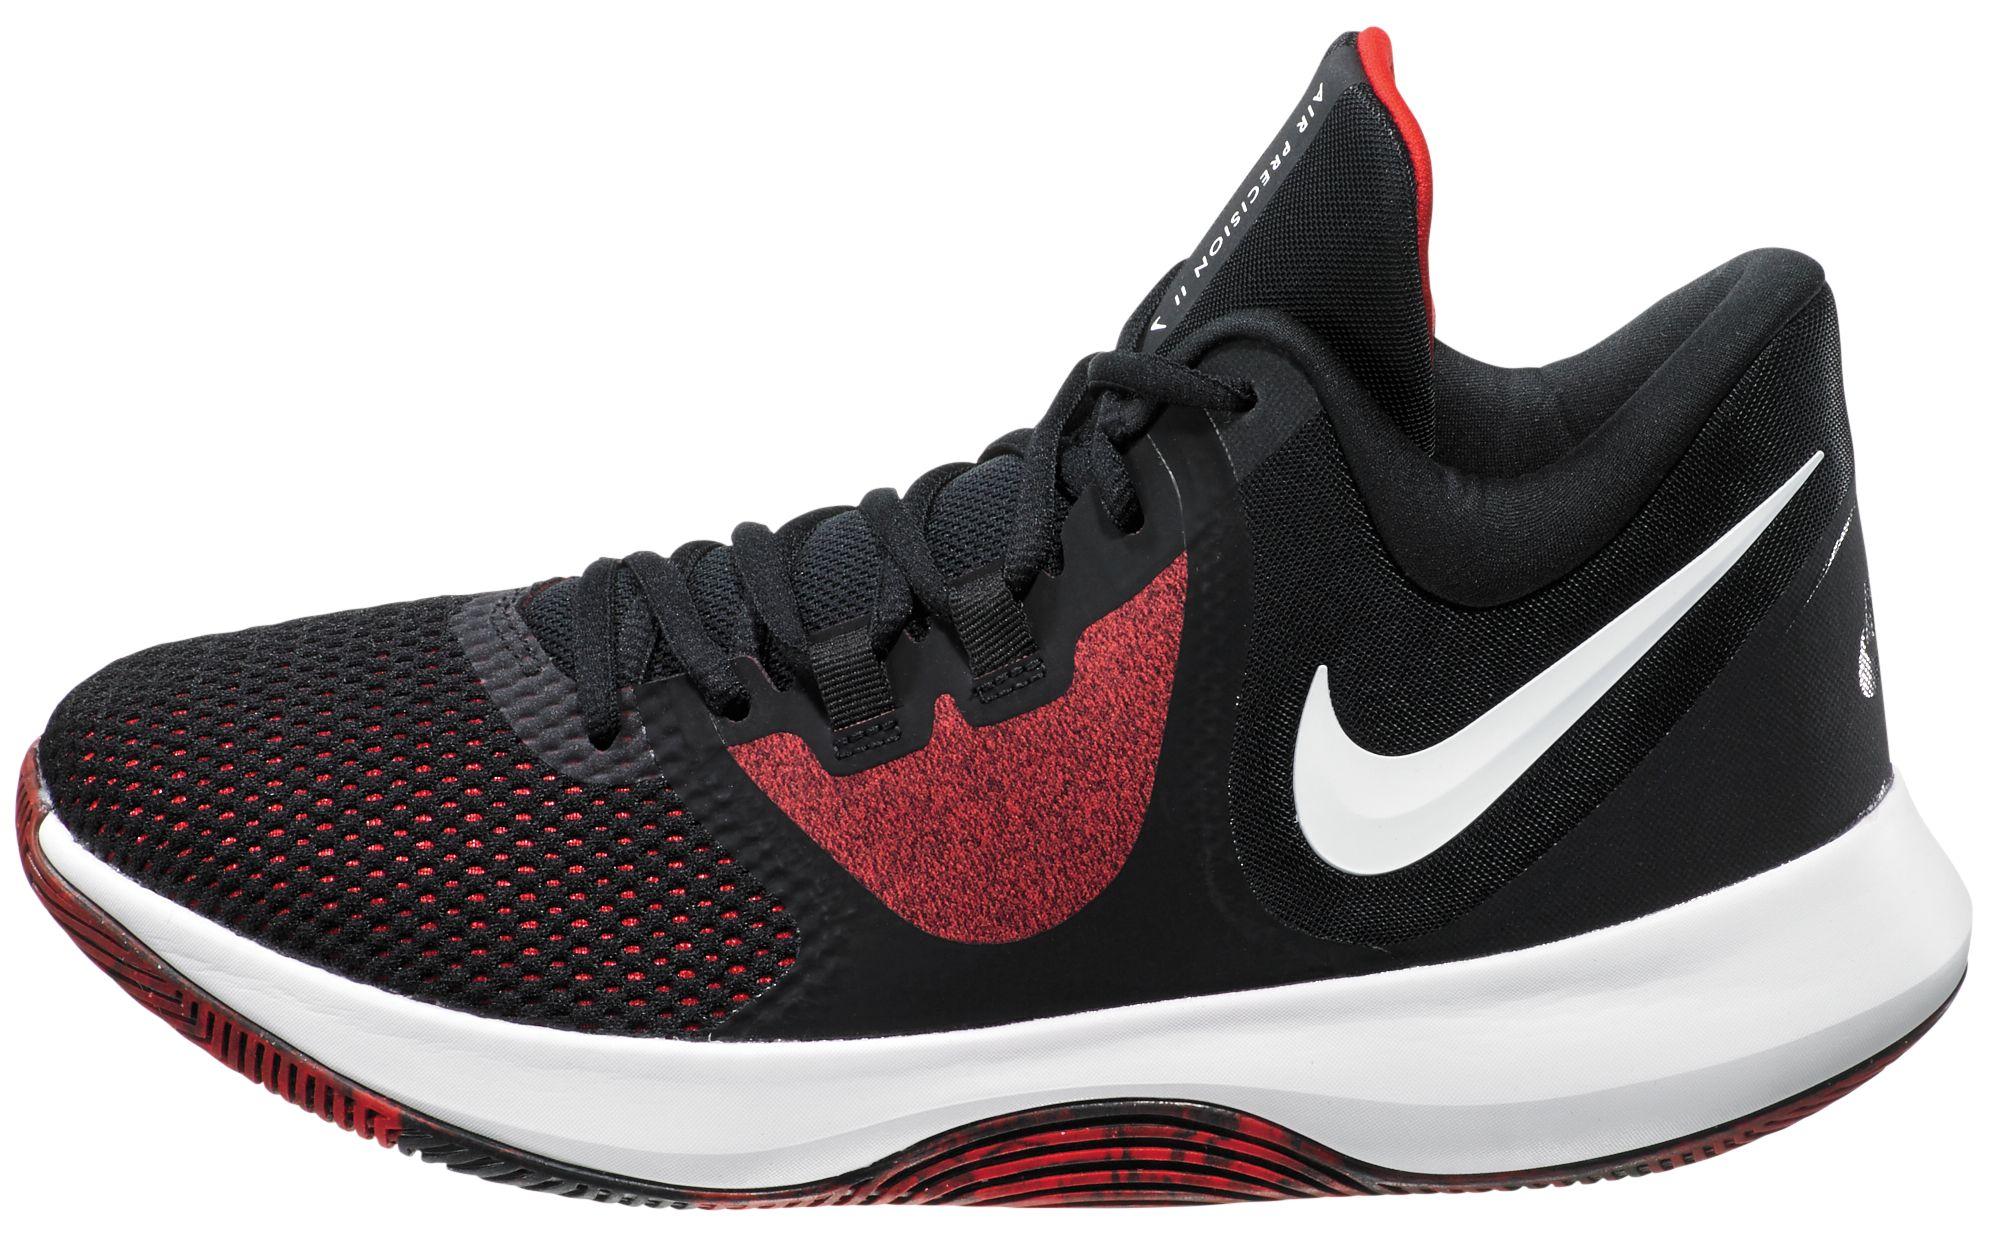 Nike Air Precision 2 Basketball Shoes in Black/Red (Black) for Men - Lyst